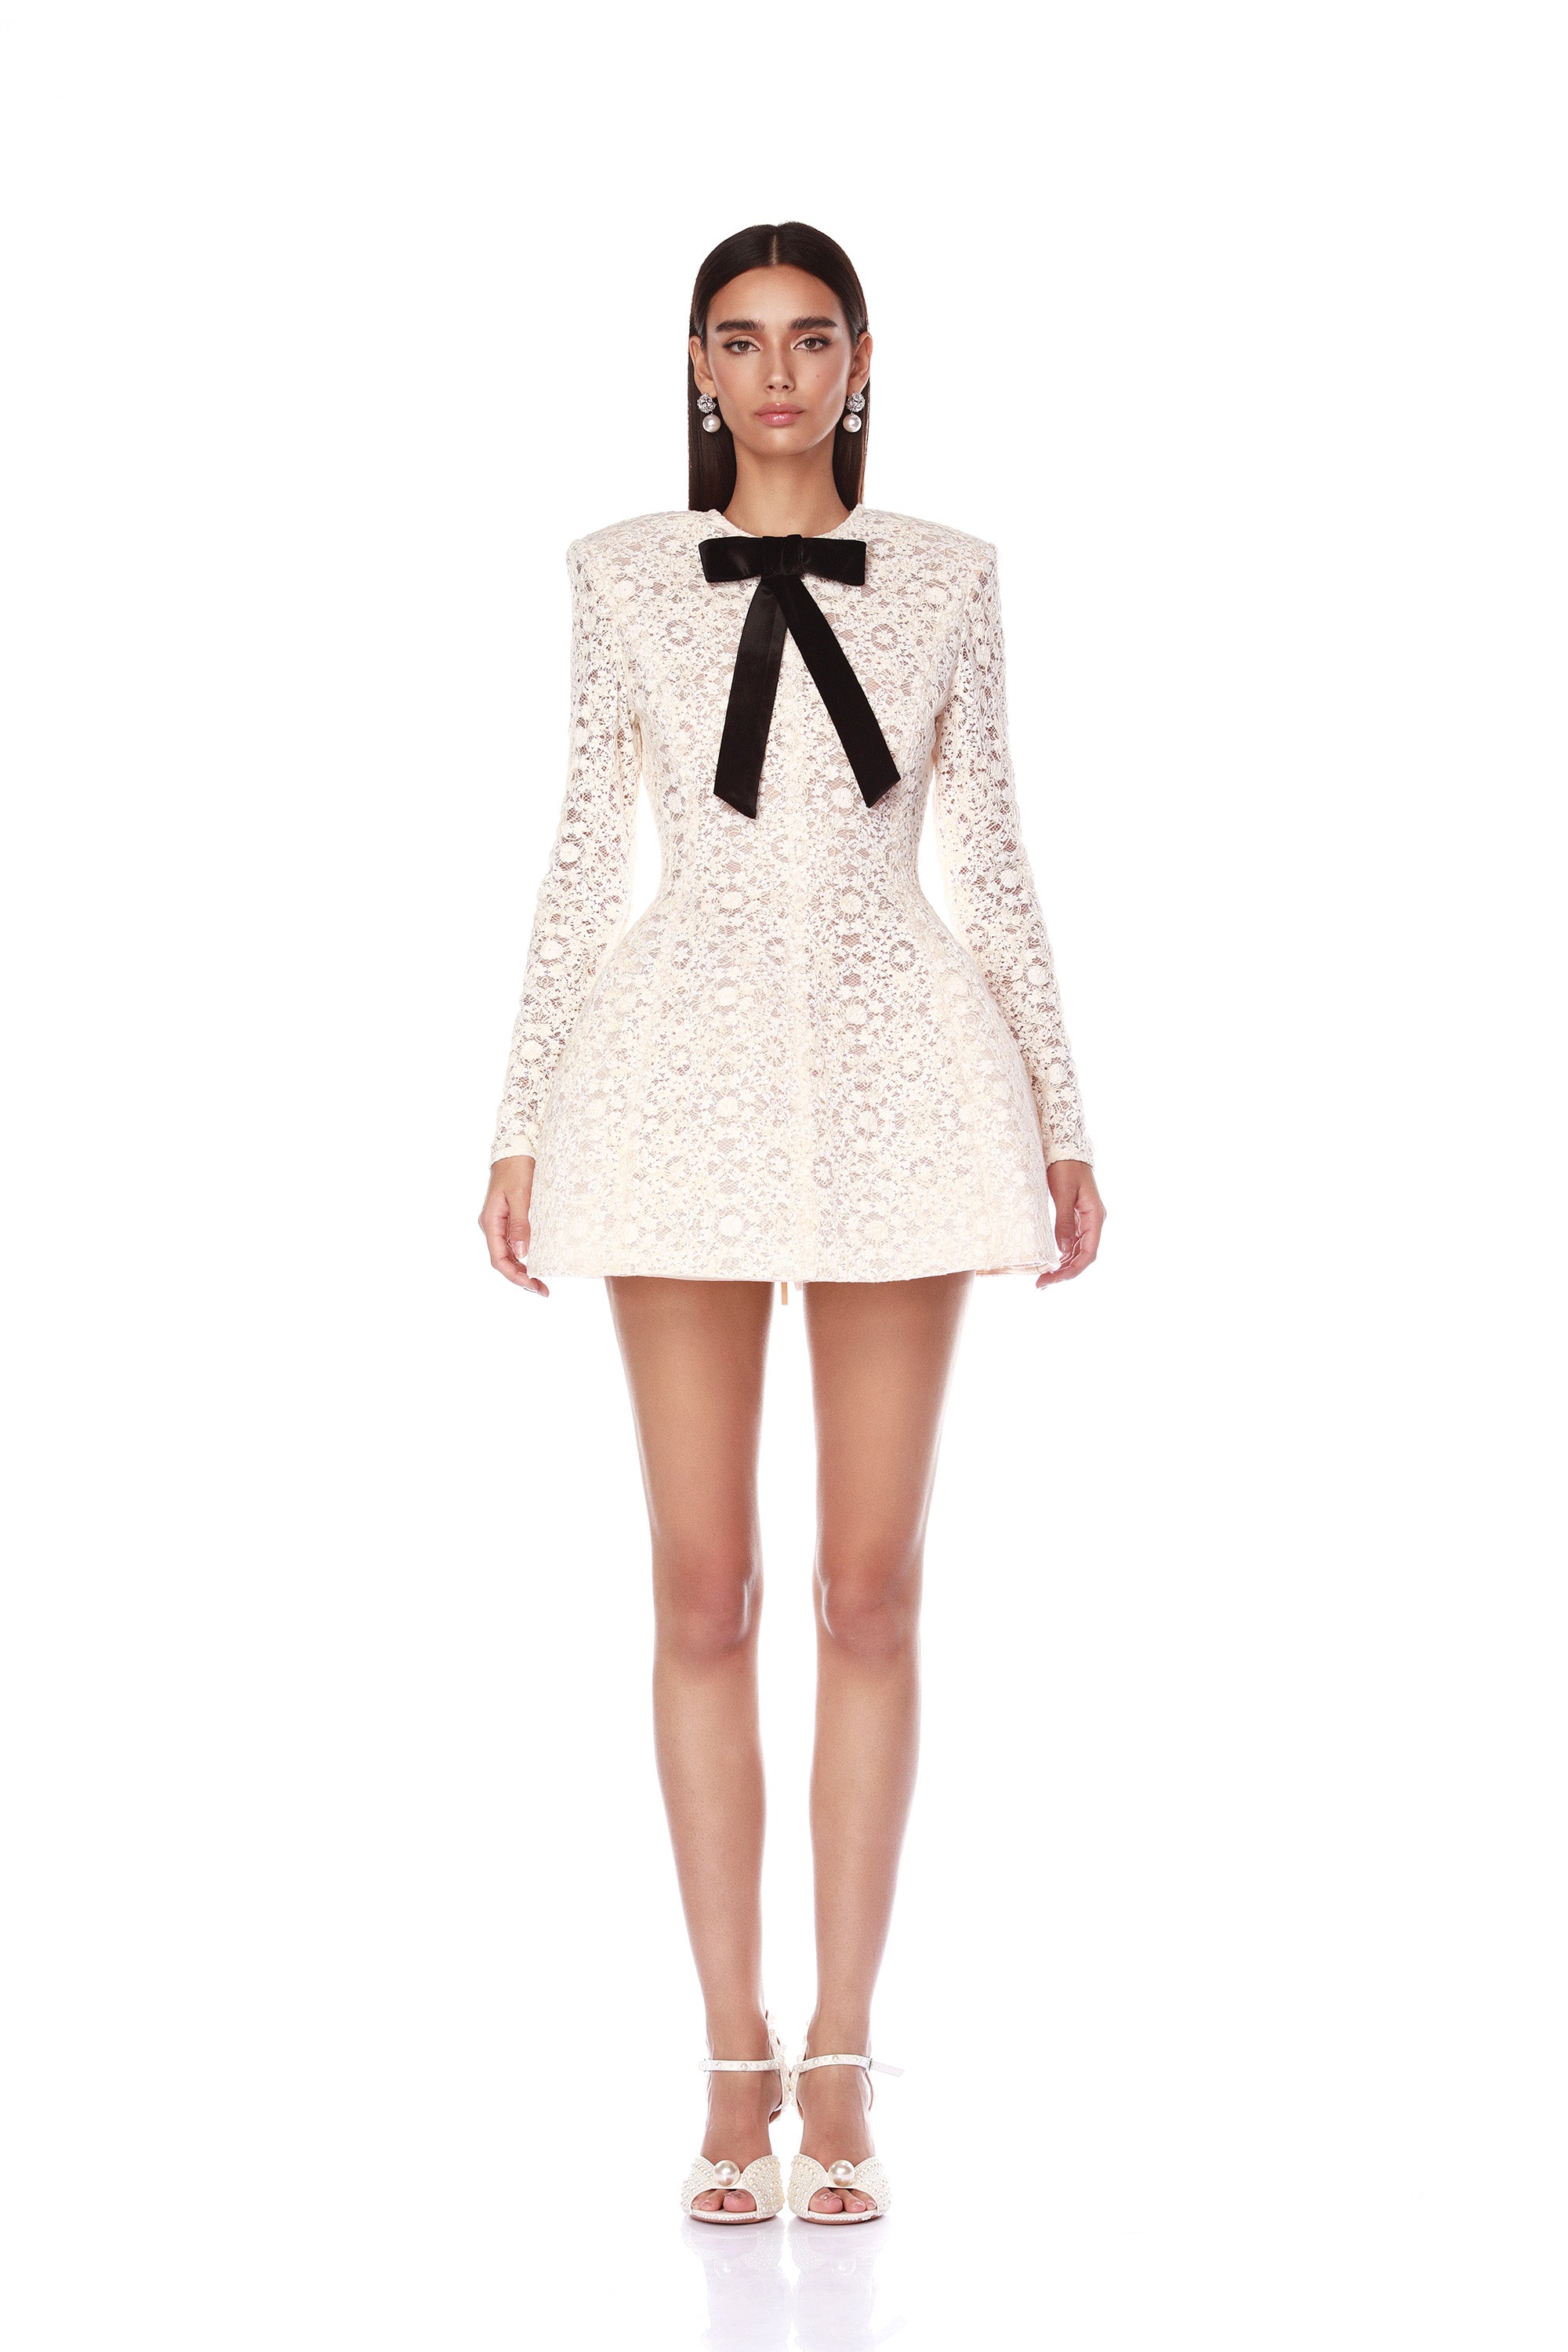 Flaunt Your Legs: Bronx and Banco's Chic Mini Dresses – BRONX AND